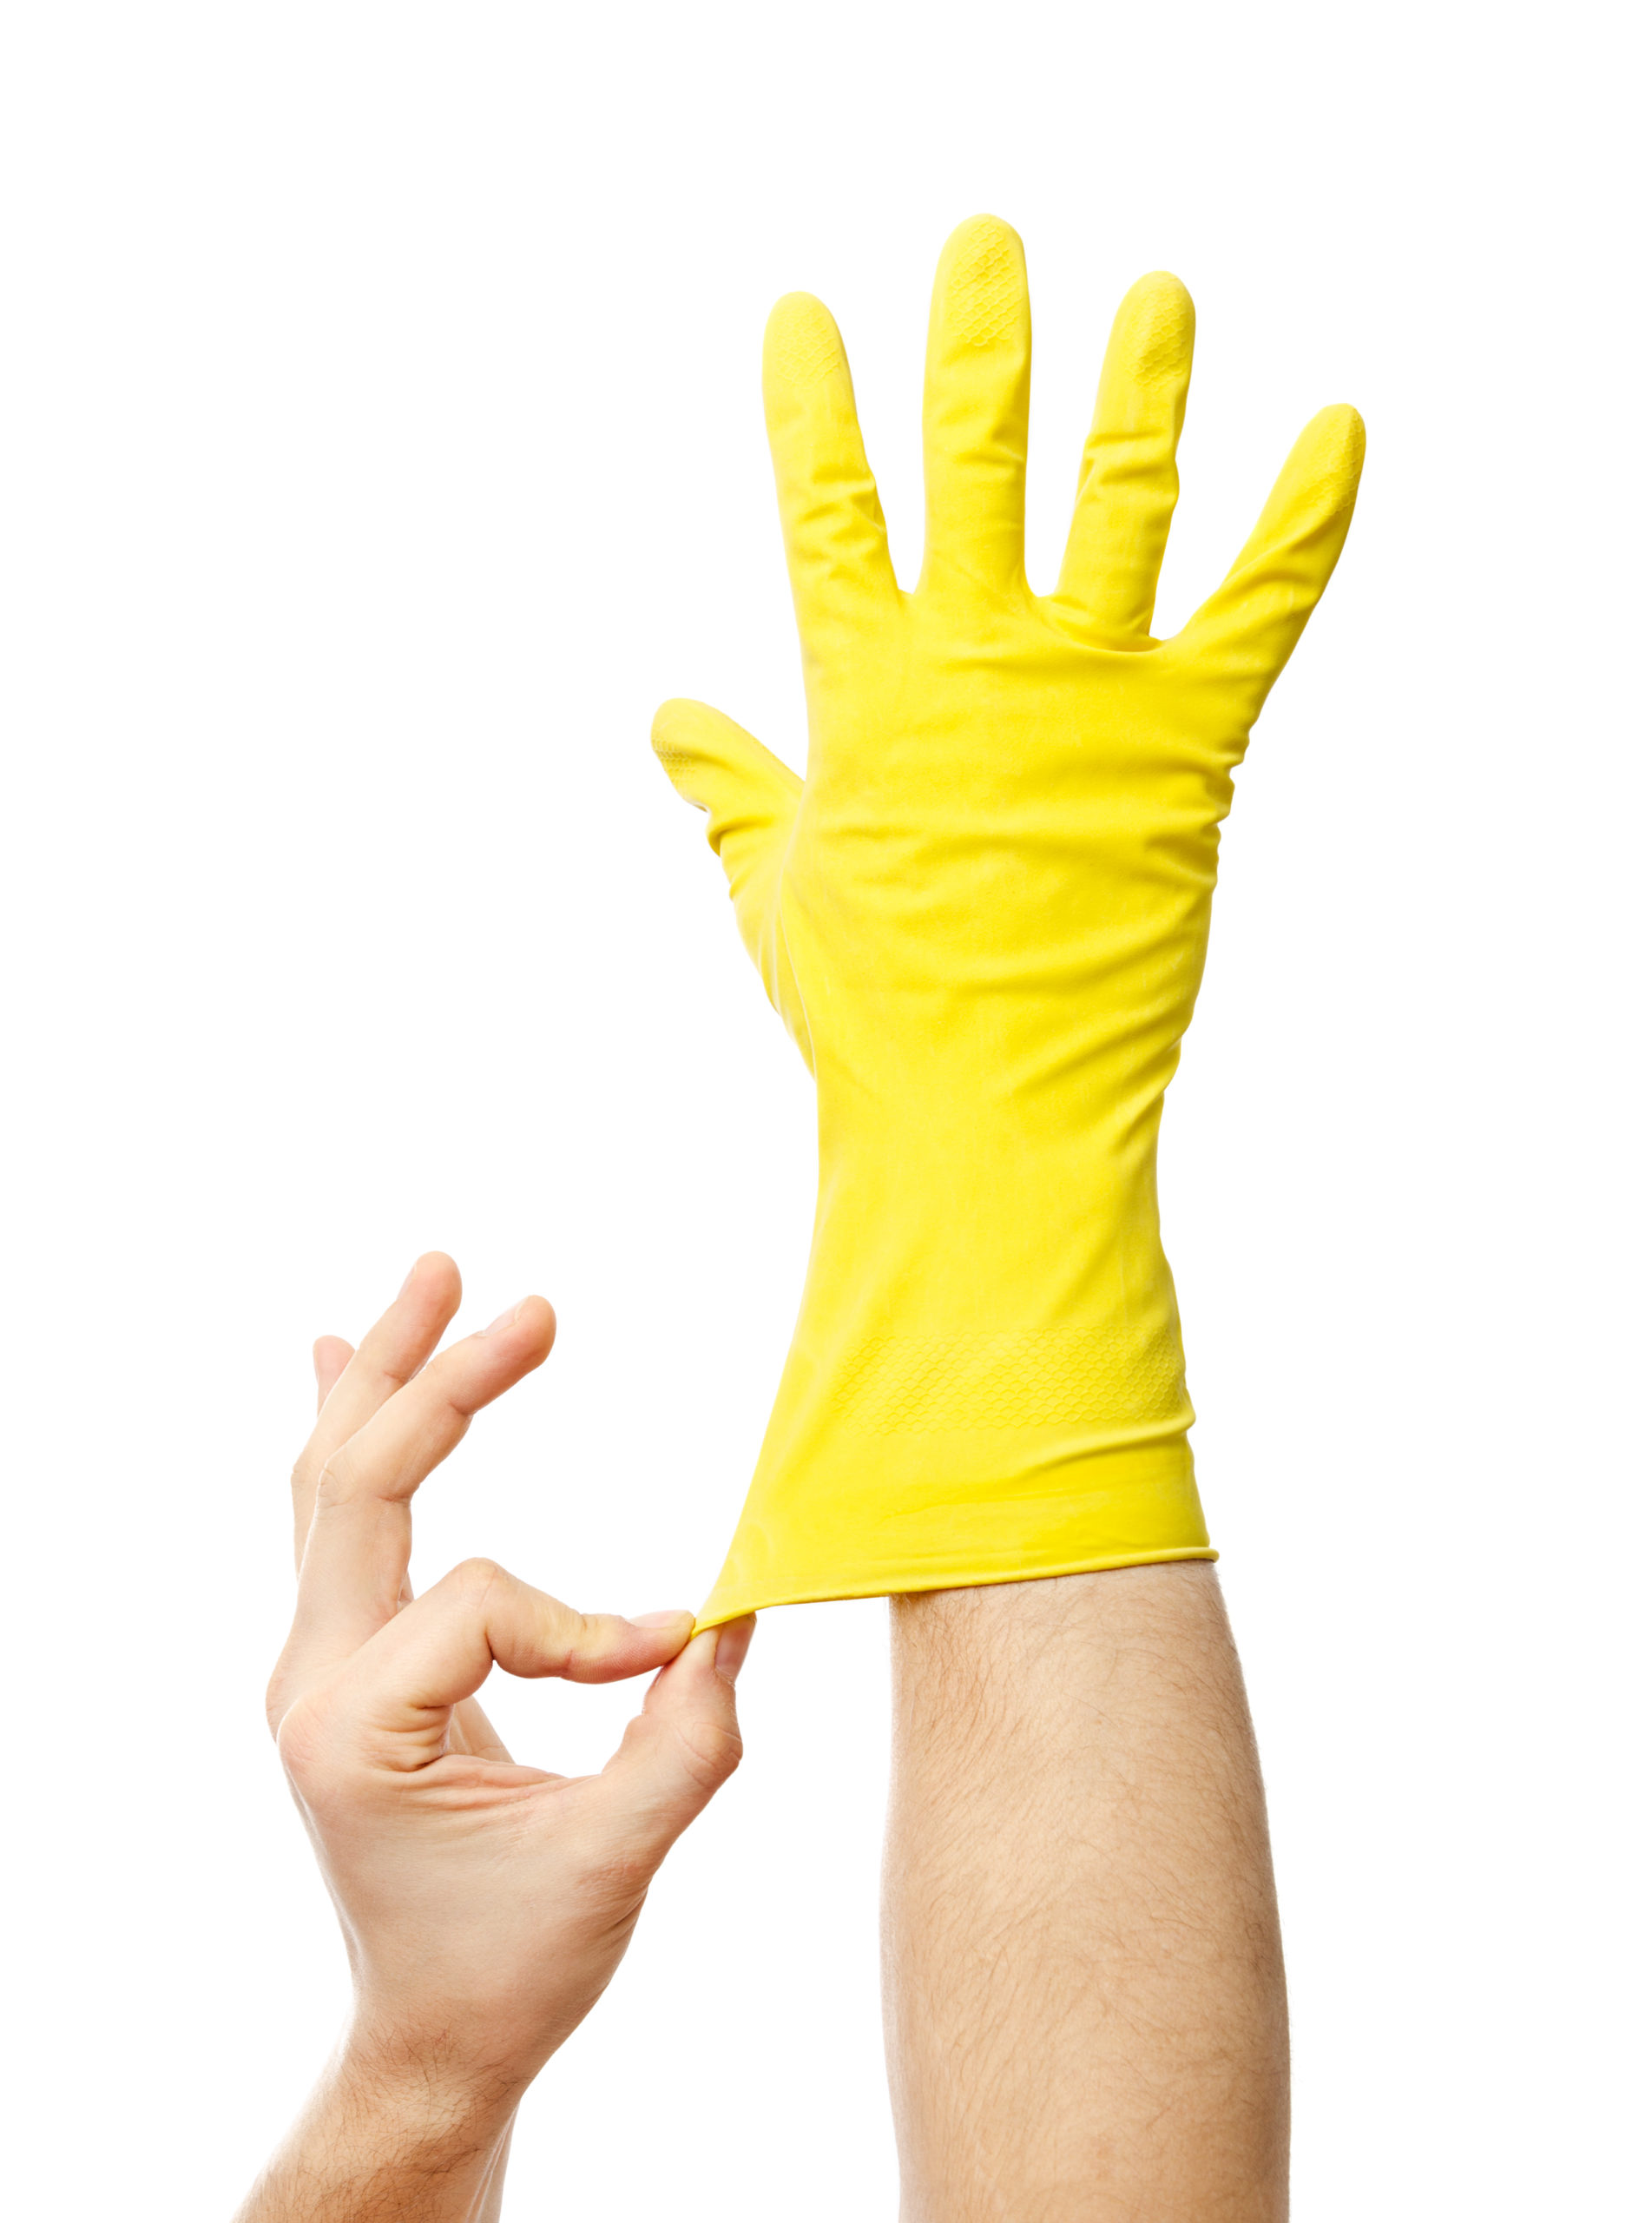 When cleaning nesting materials or feces and urine from mice and rats, wear non-porous gloves and a mask.